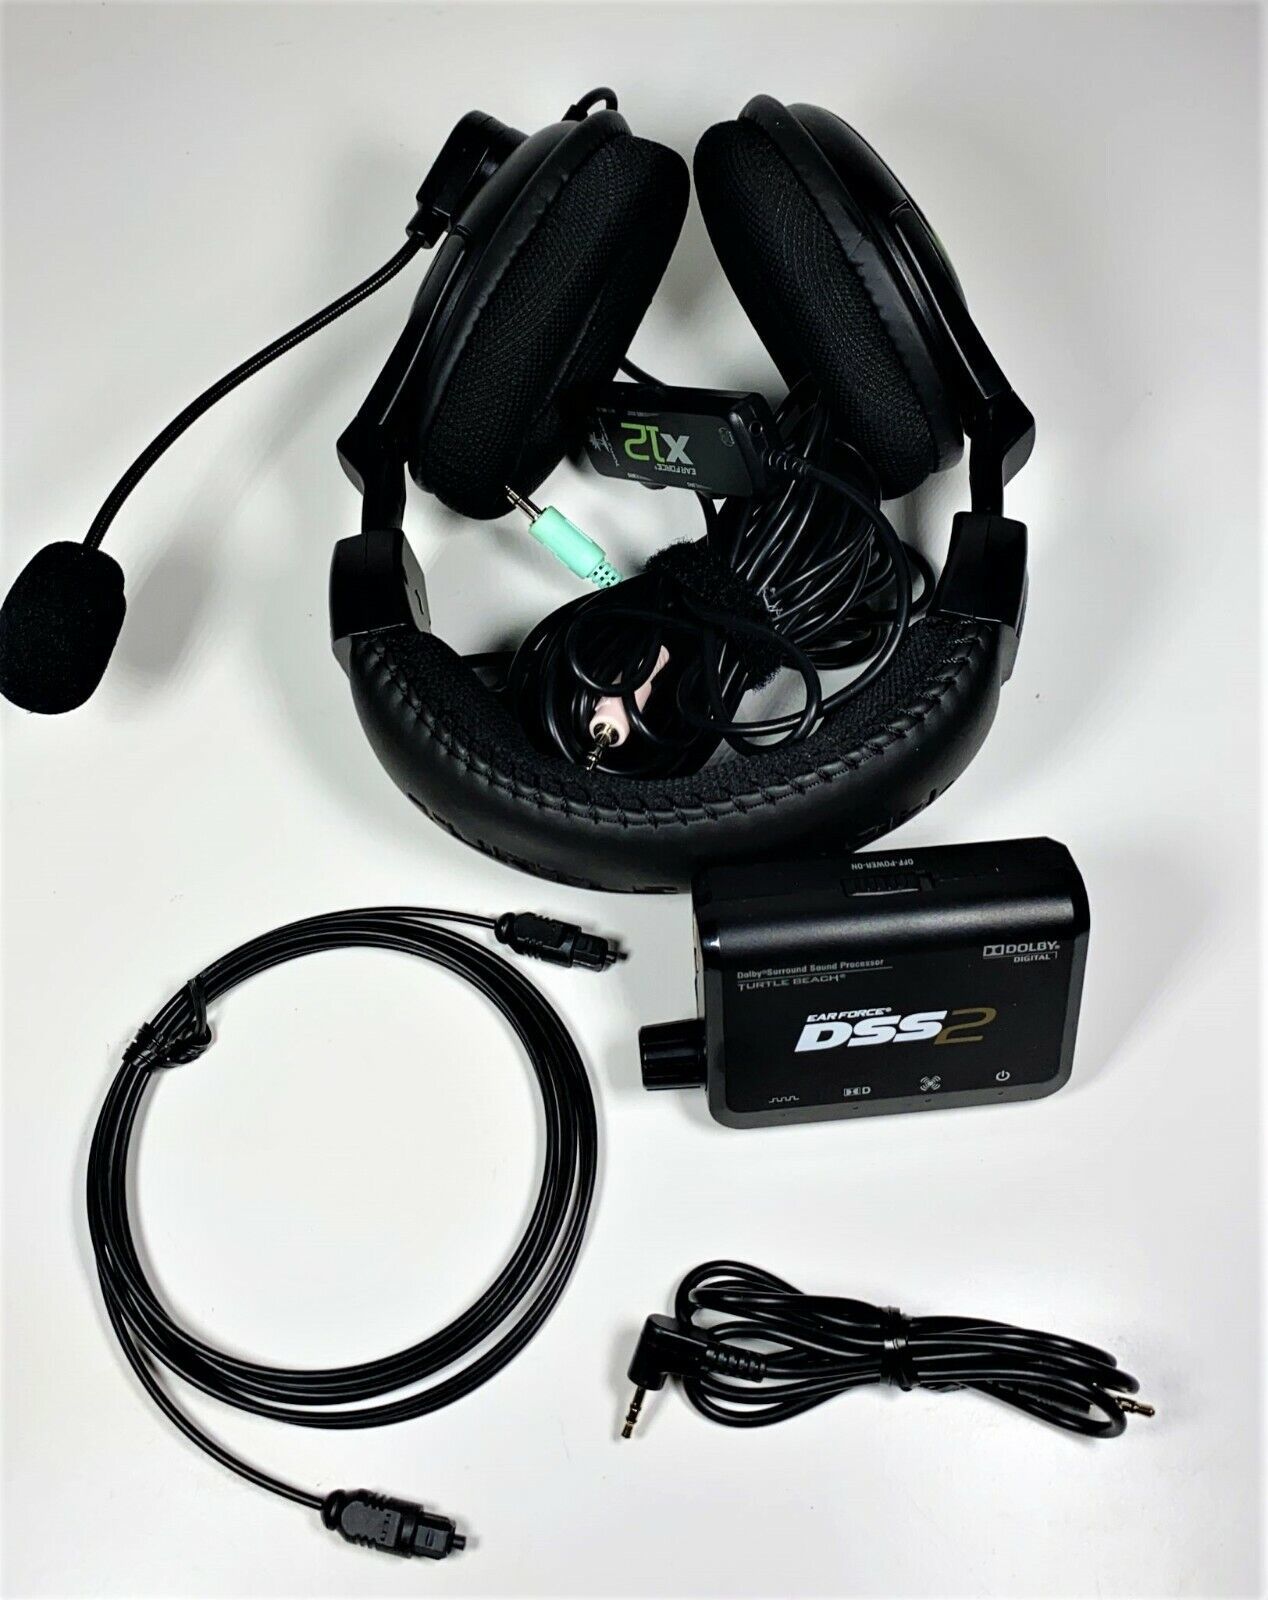 Primary image for Turtle Beach Oreille Force DX12